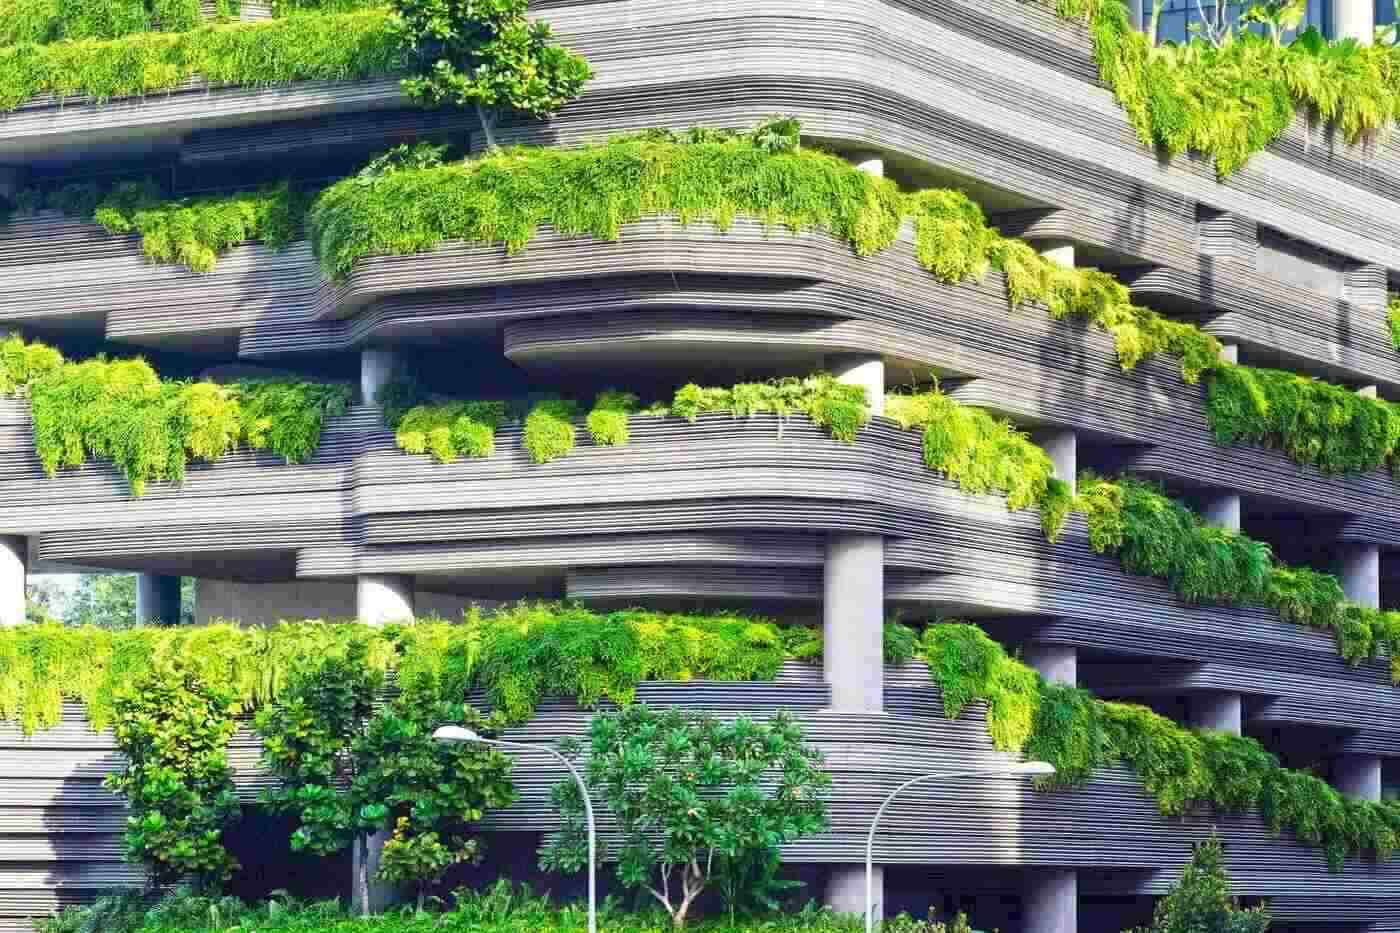 World Calls for a More Eco-Friendly Construction